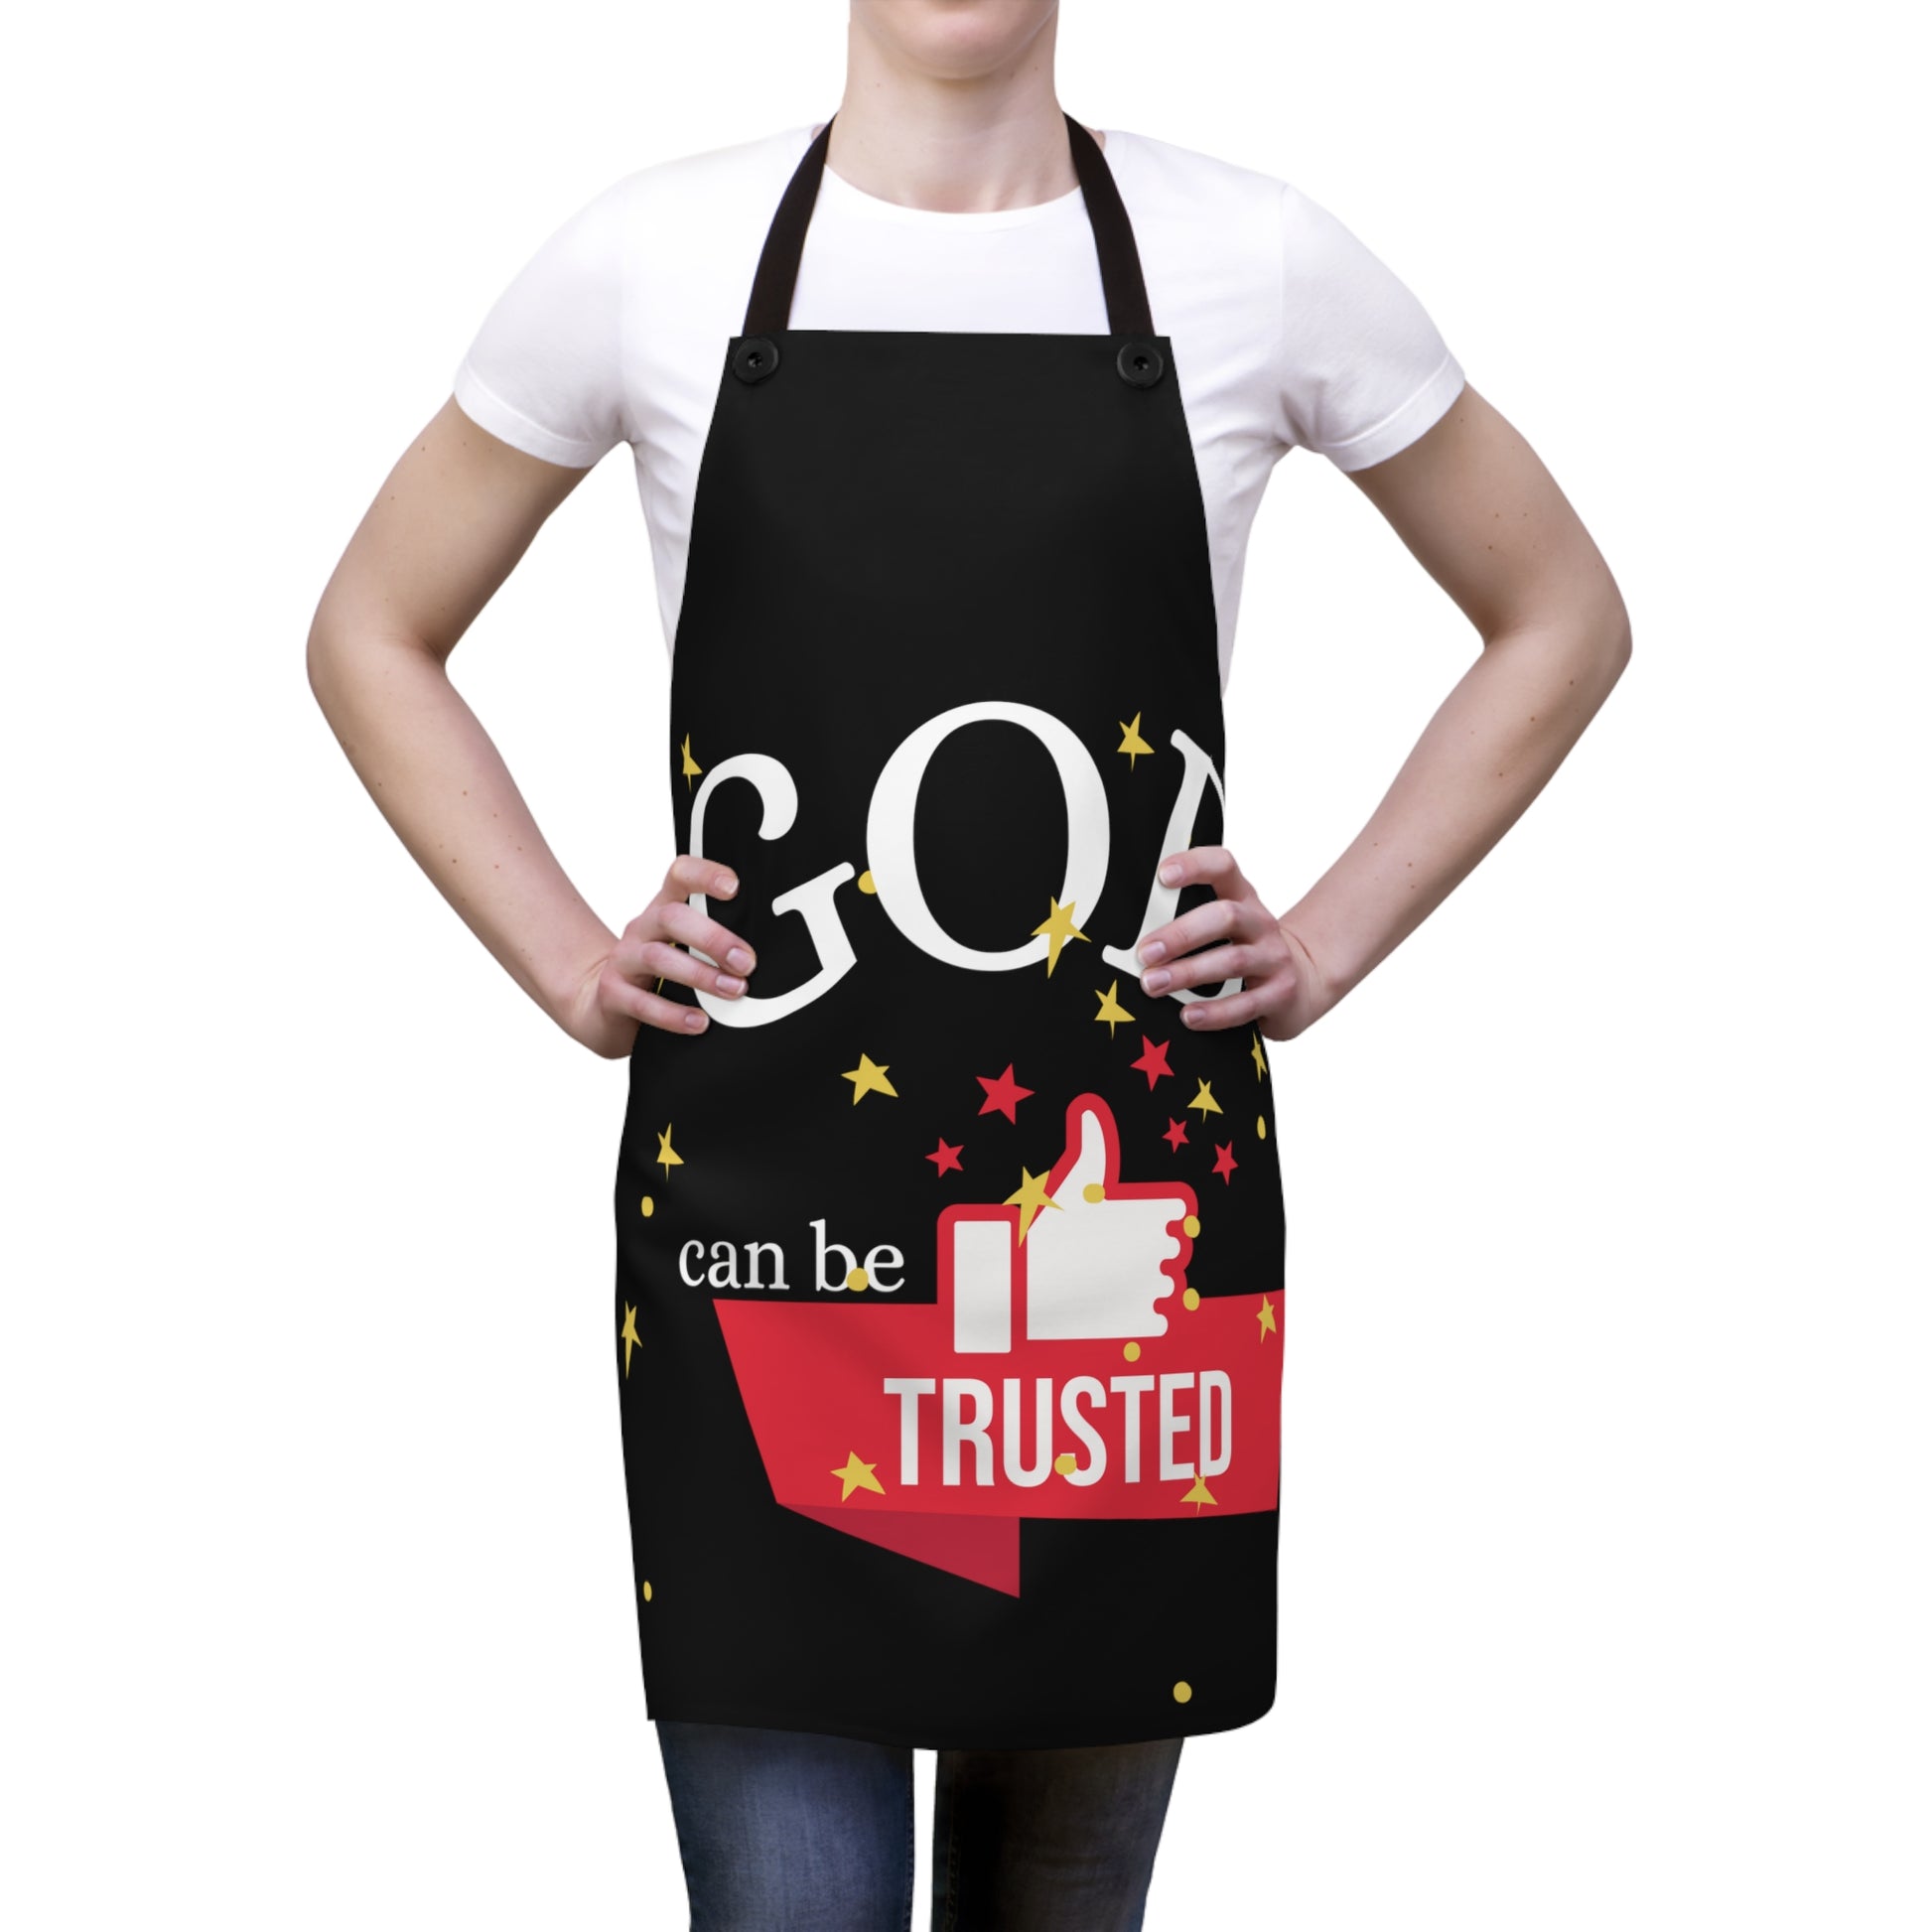 God Can Be Trusted Motivational Apron - Motivational Treats